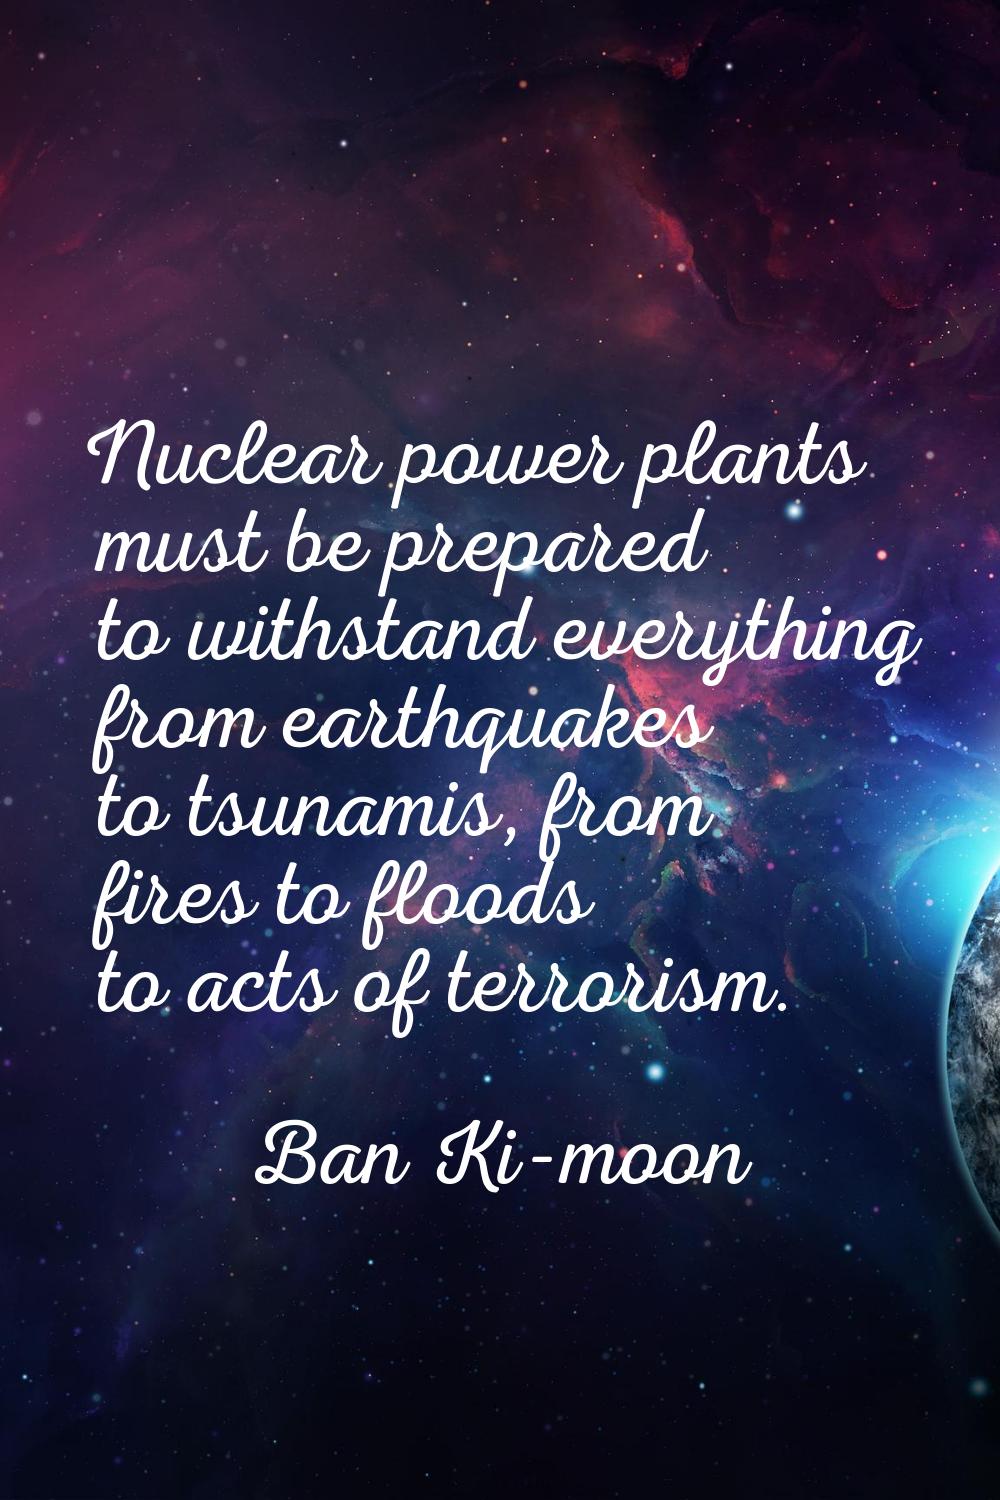 Nuclear power plants must be prepared to withstand everything from earthquakes to tsunamis, from fi